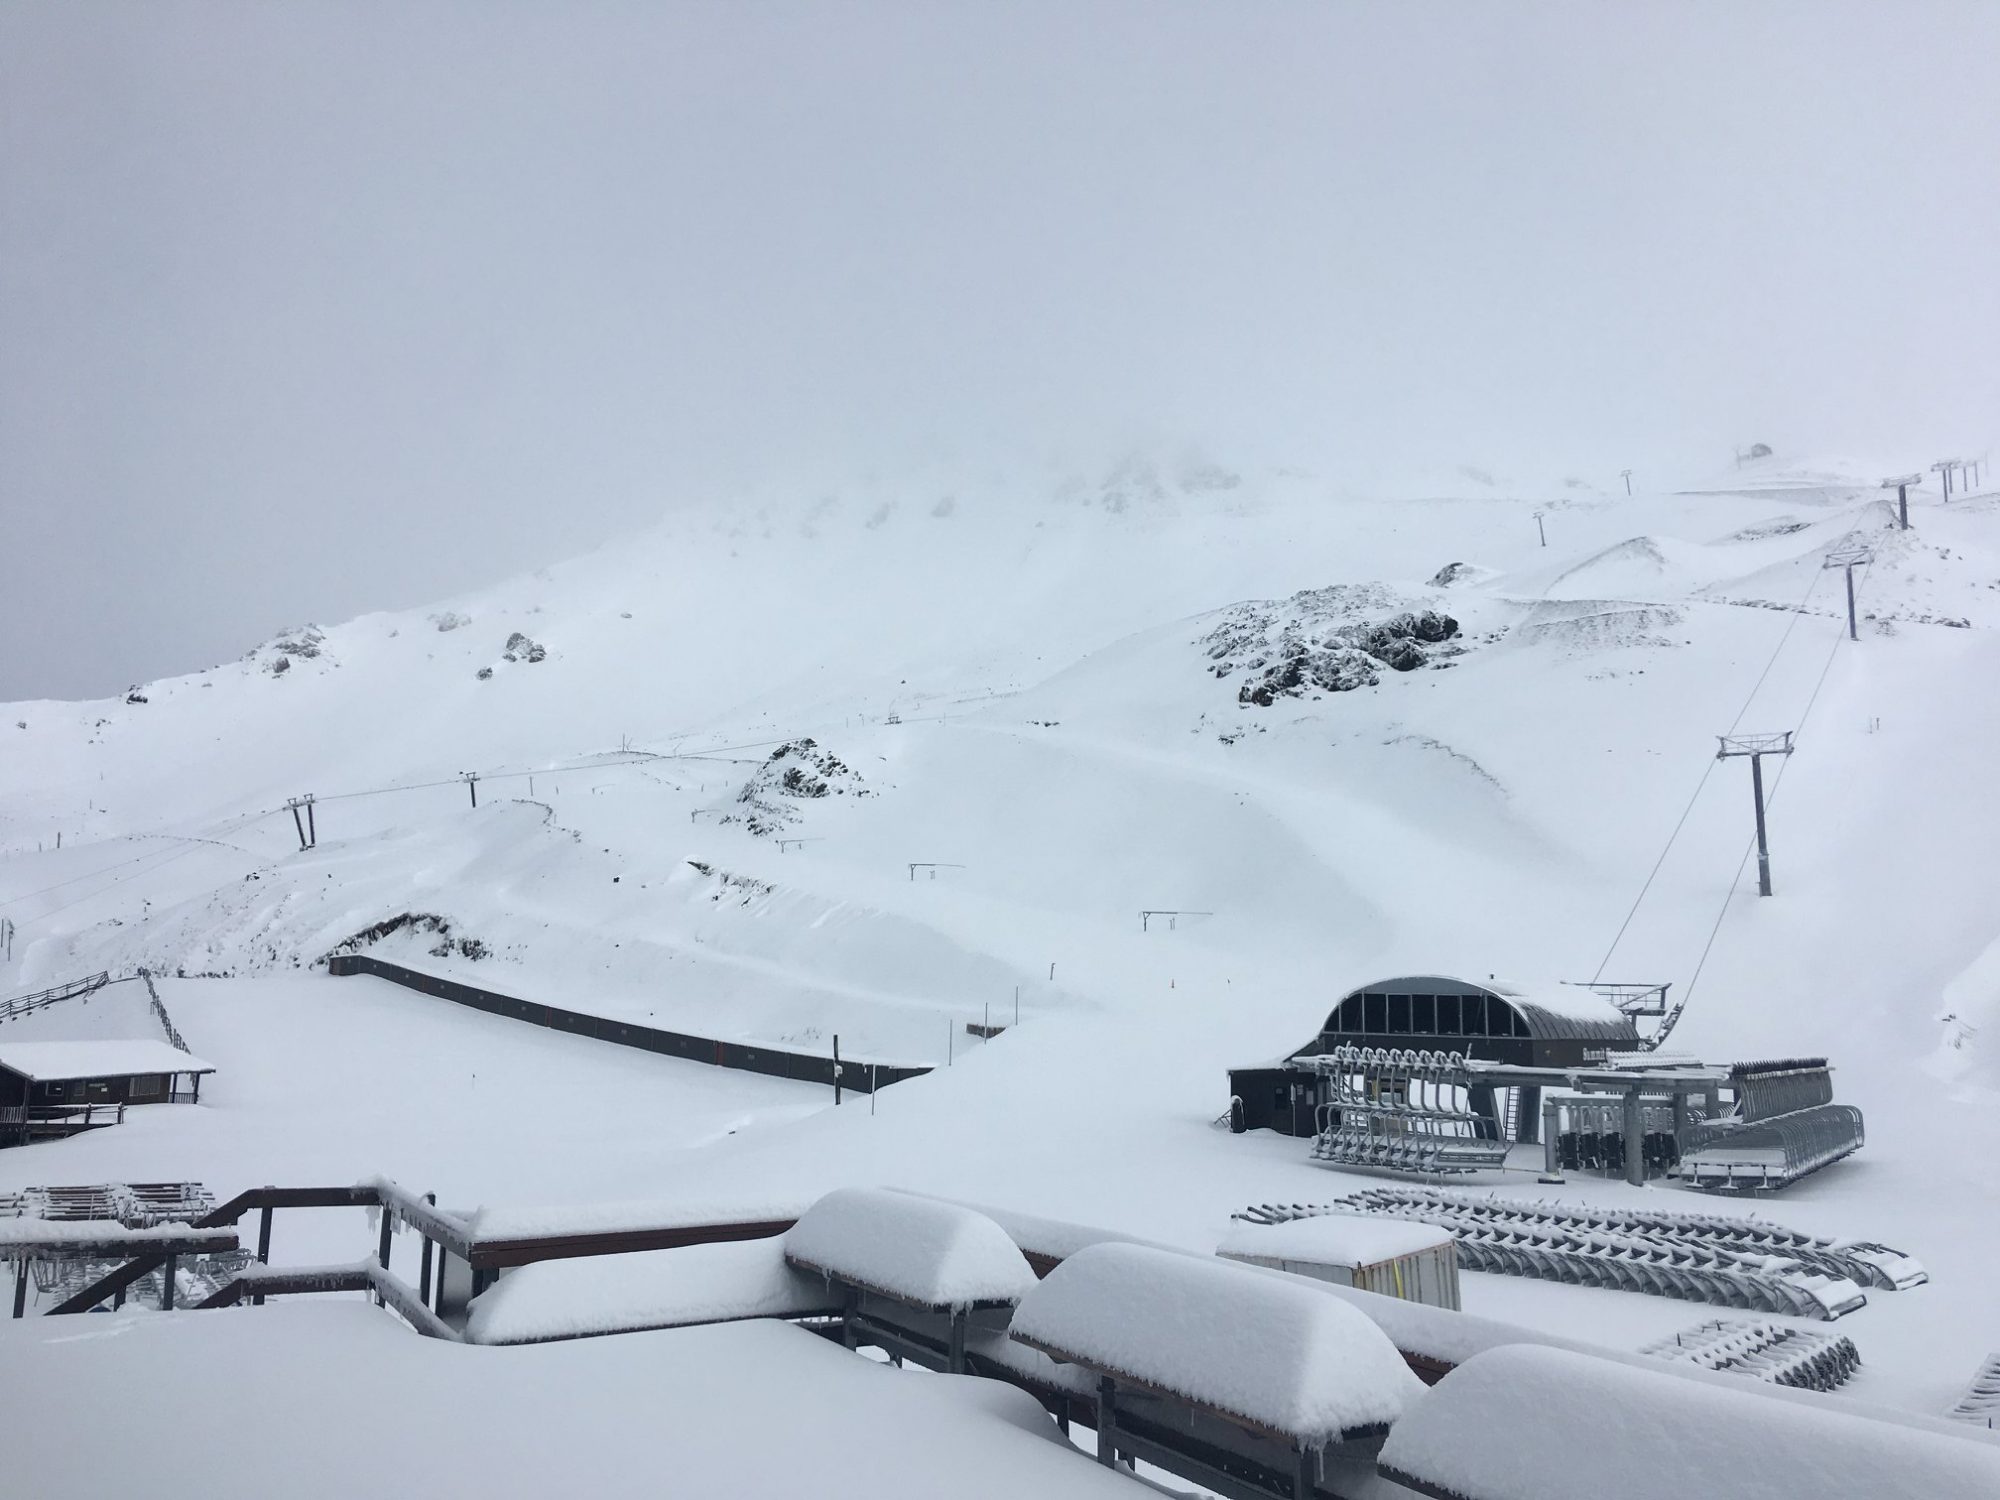 New Zealand Ski Area To Open This Weekend After Summer Snowfall - InTheSnow